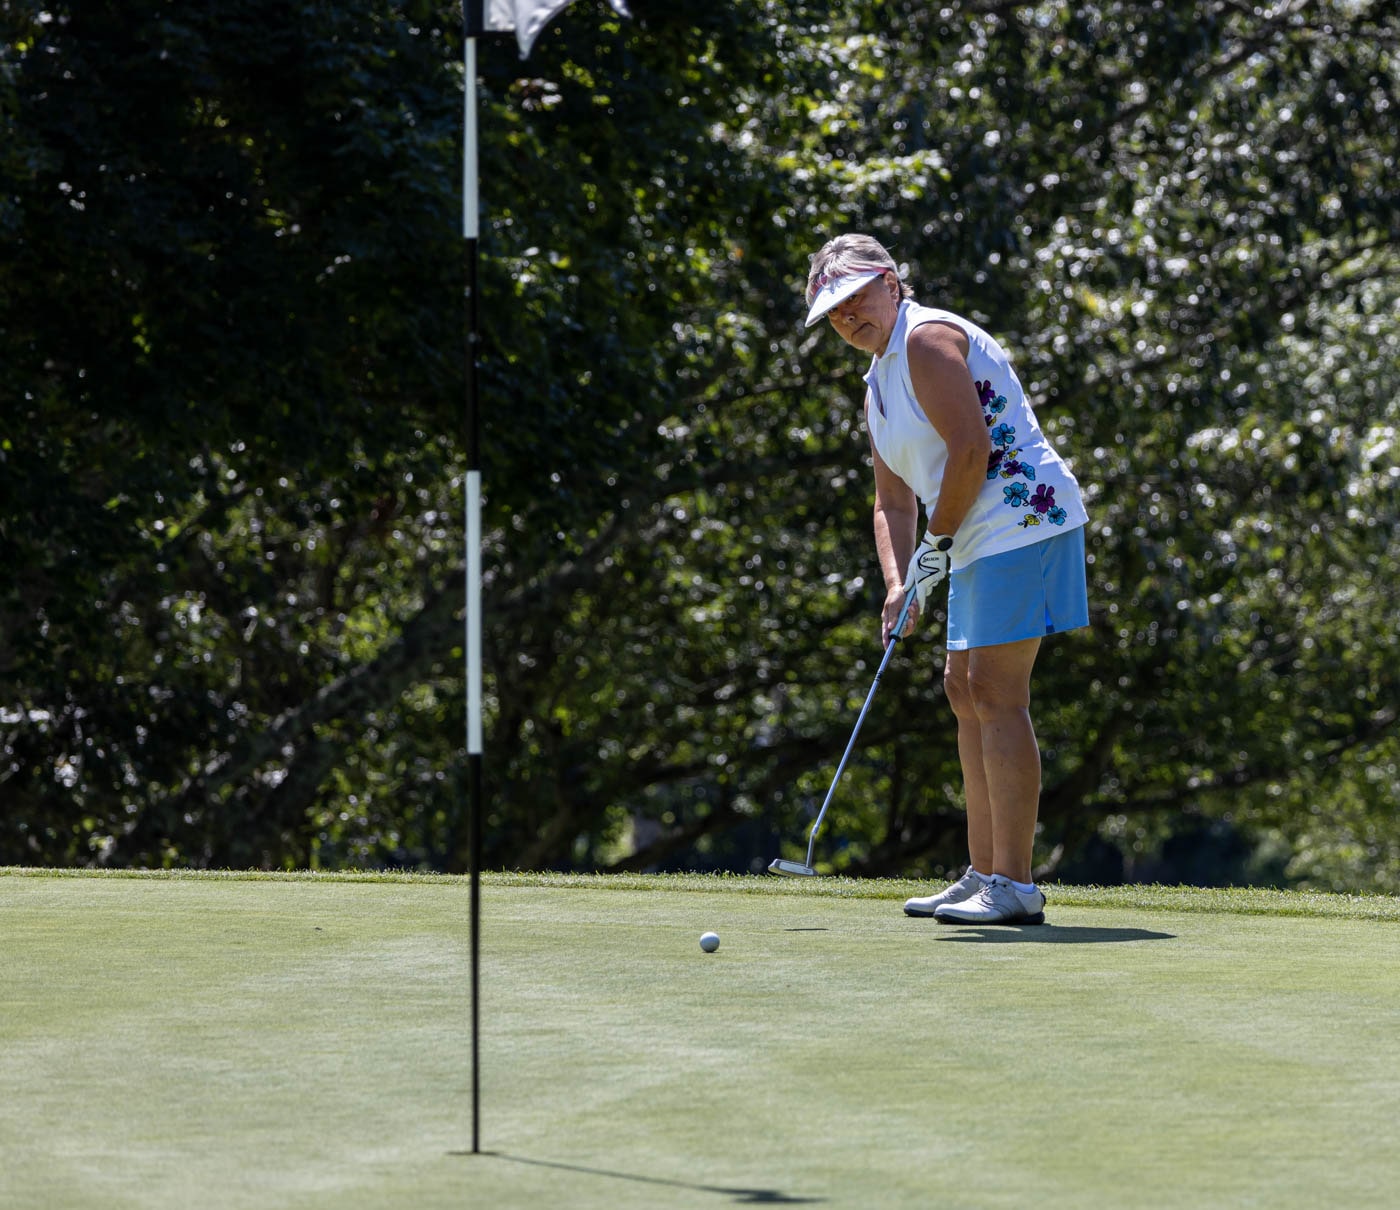 Country-Club-Of-New-Bedford FB-2023-Womens-FB-Gallery August-2023-Country-Club-Of-New-Bedford-FB-2023-Womens-FB-Gallery August-2023-Womens-FB-Gallery-Thursday-Photos-Image-38